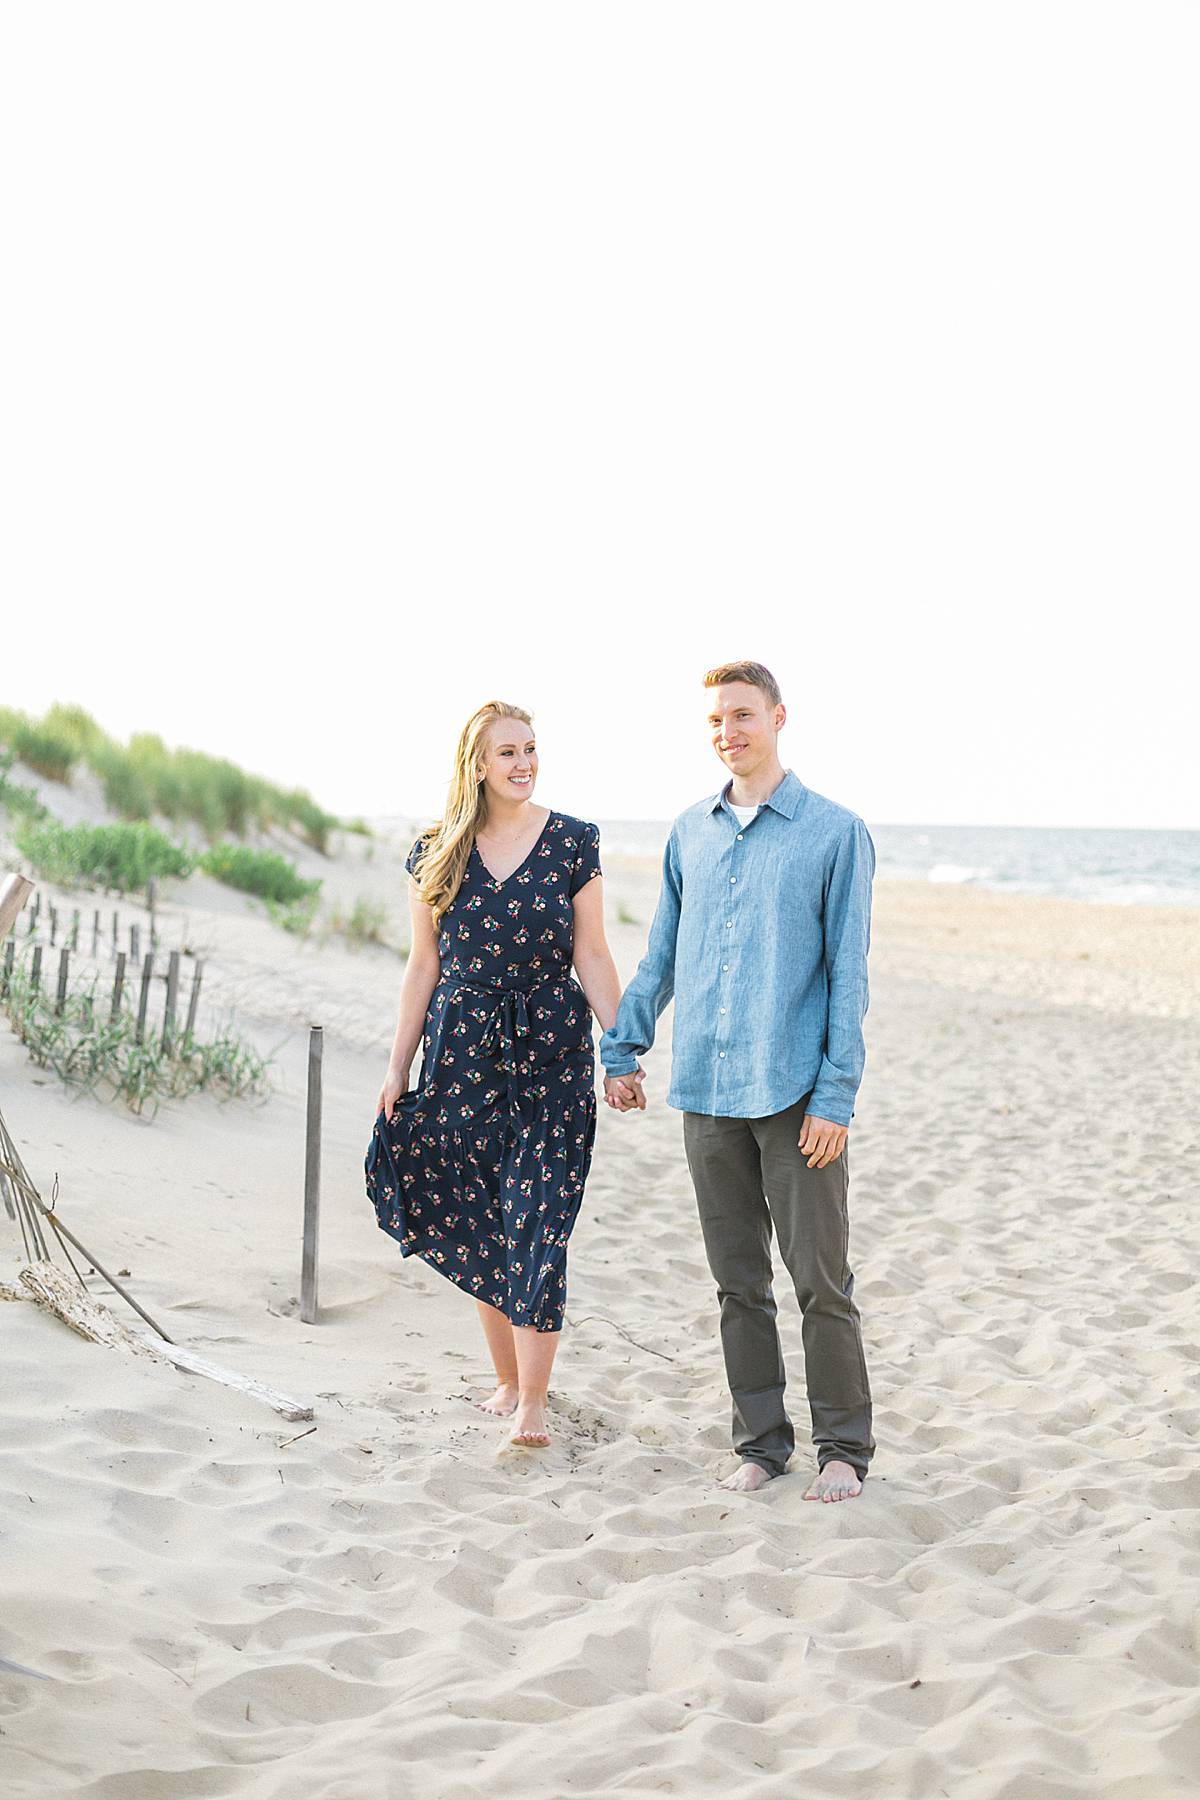 jennette's pier kill devil hills, outer banks, north carolina beachfront destination and romantic elegant engagement session photos with a long dress, photo by laurelyn savannah photography